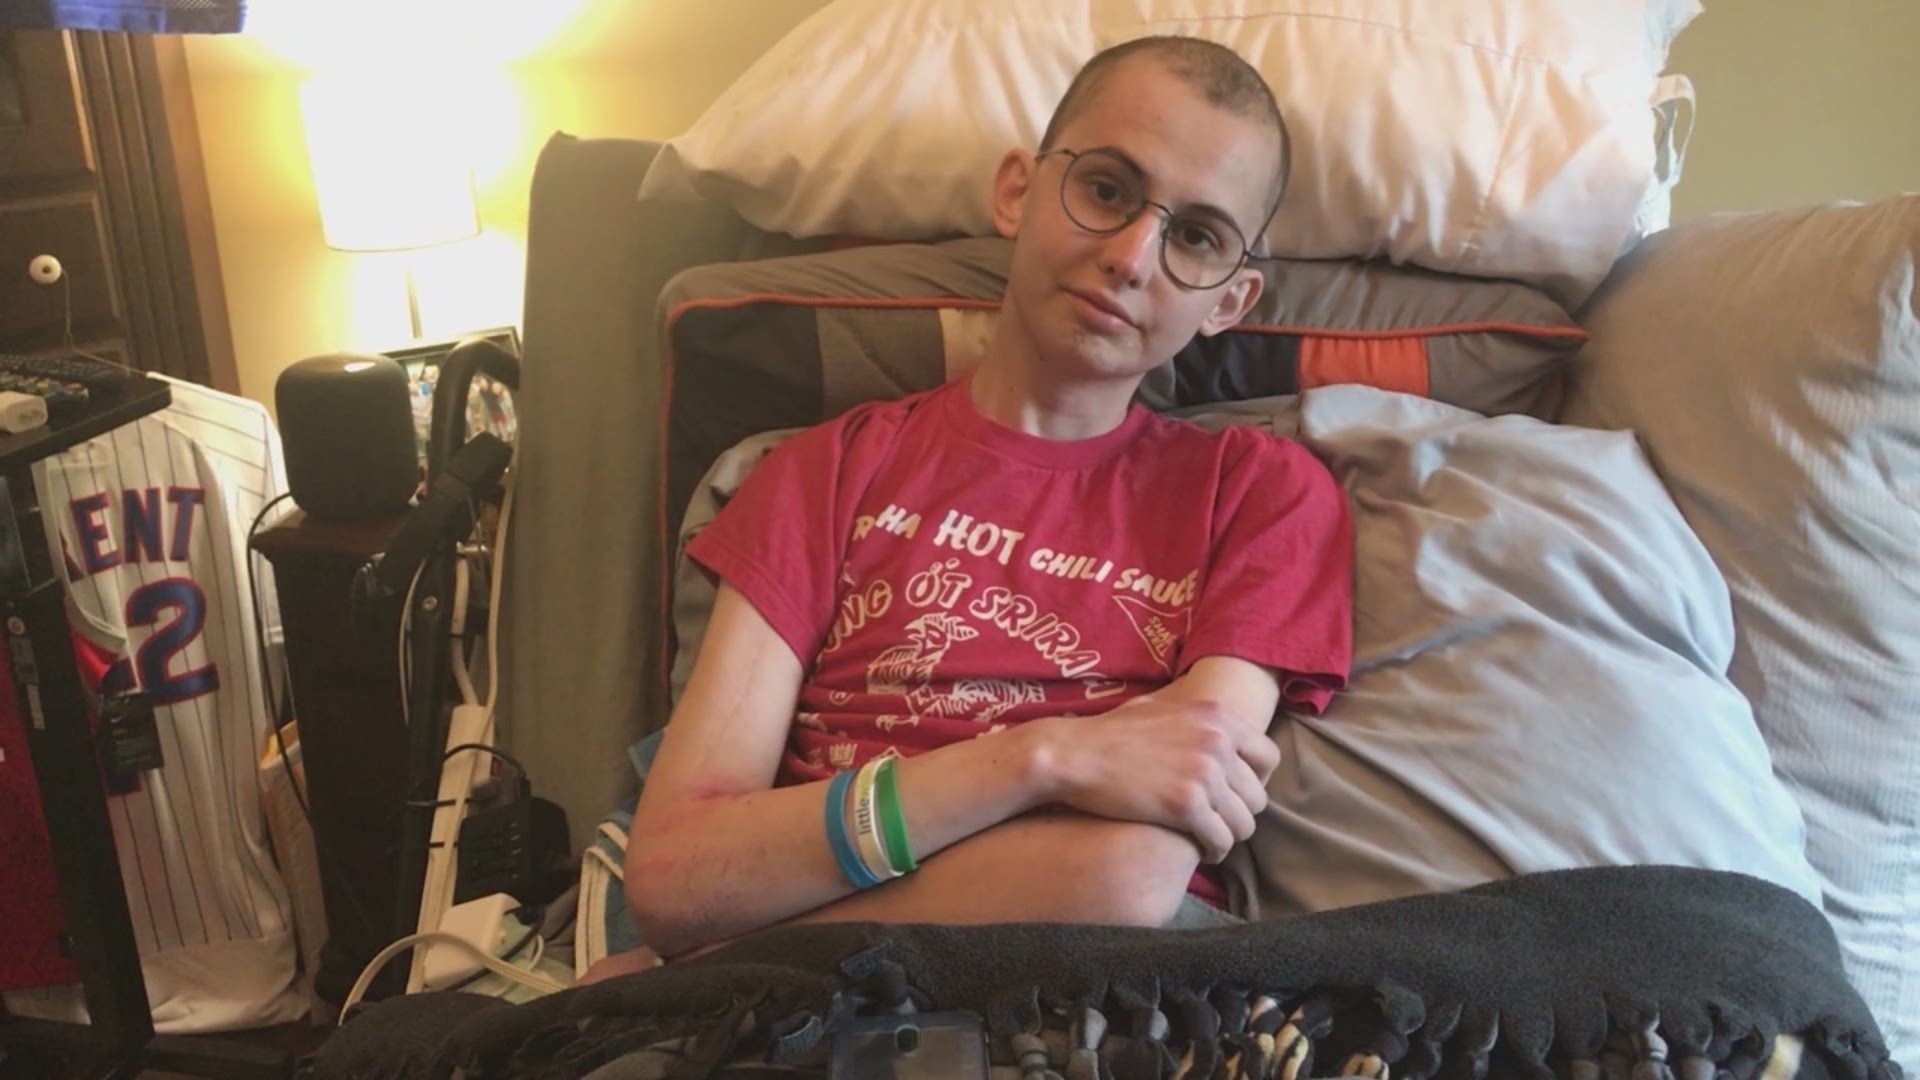 Tyler Trent is a terminal bone cancer fighter. He's also a big fan of Purdue and has become an inspirational icon.